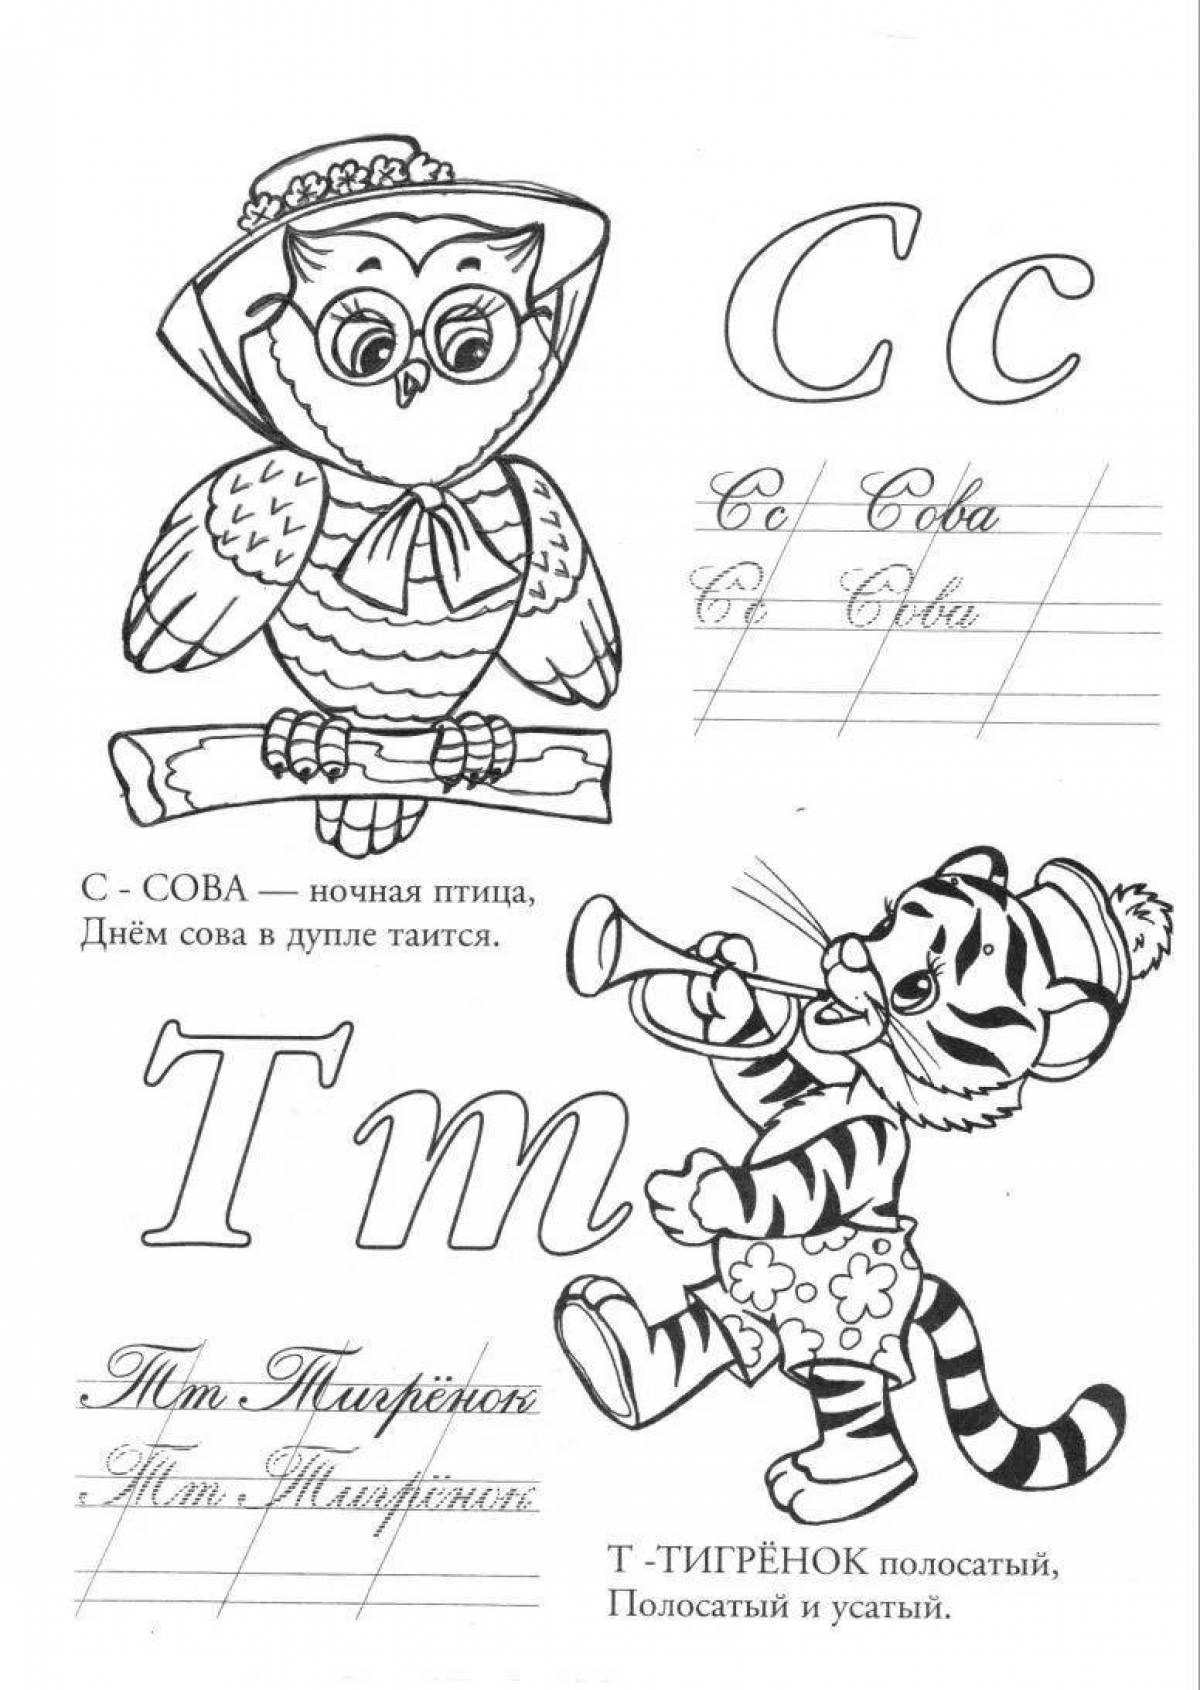 Color-frenzy alphabet coloring page